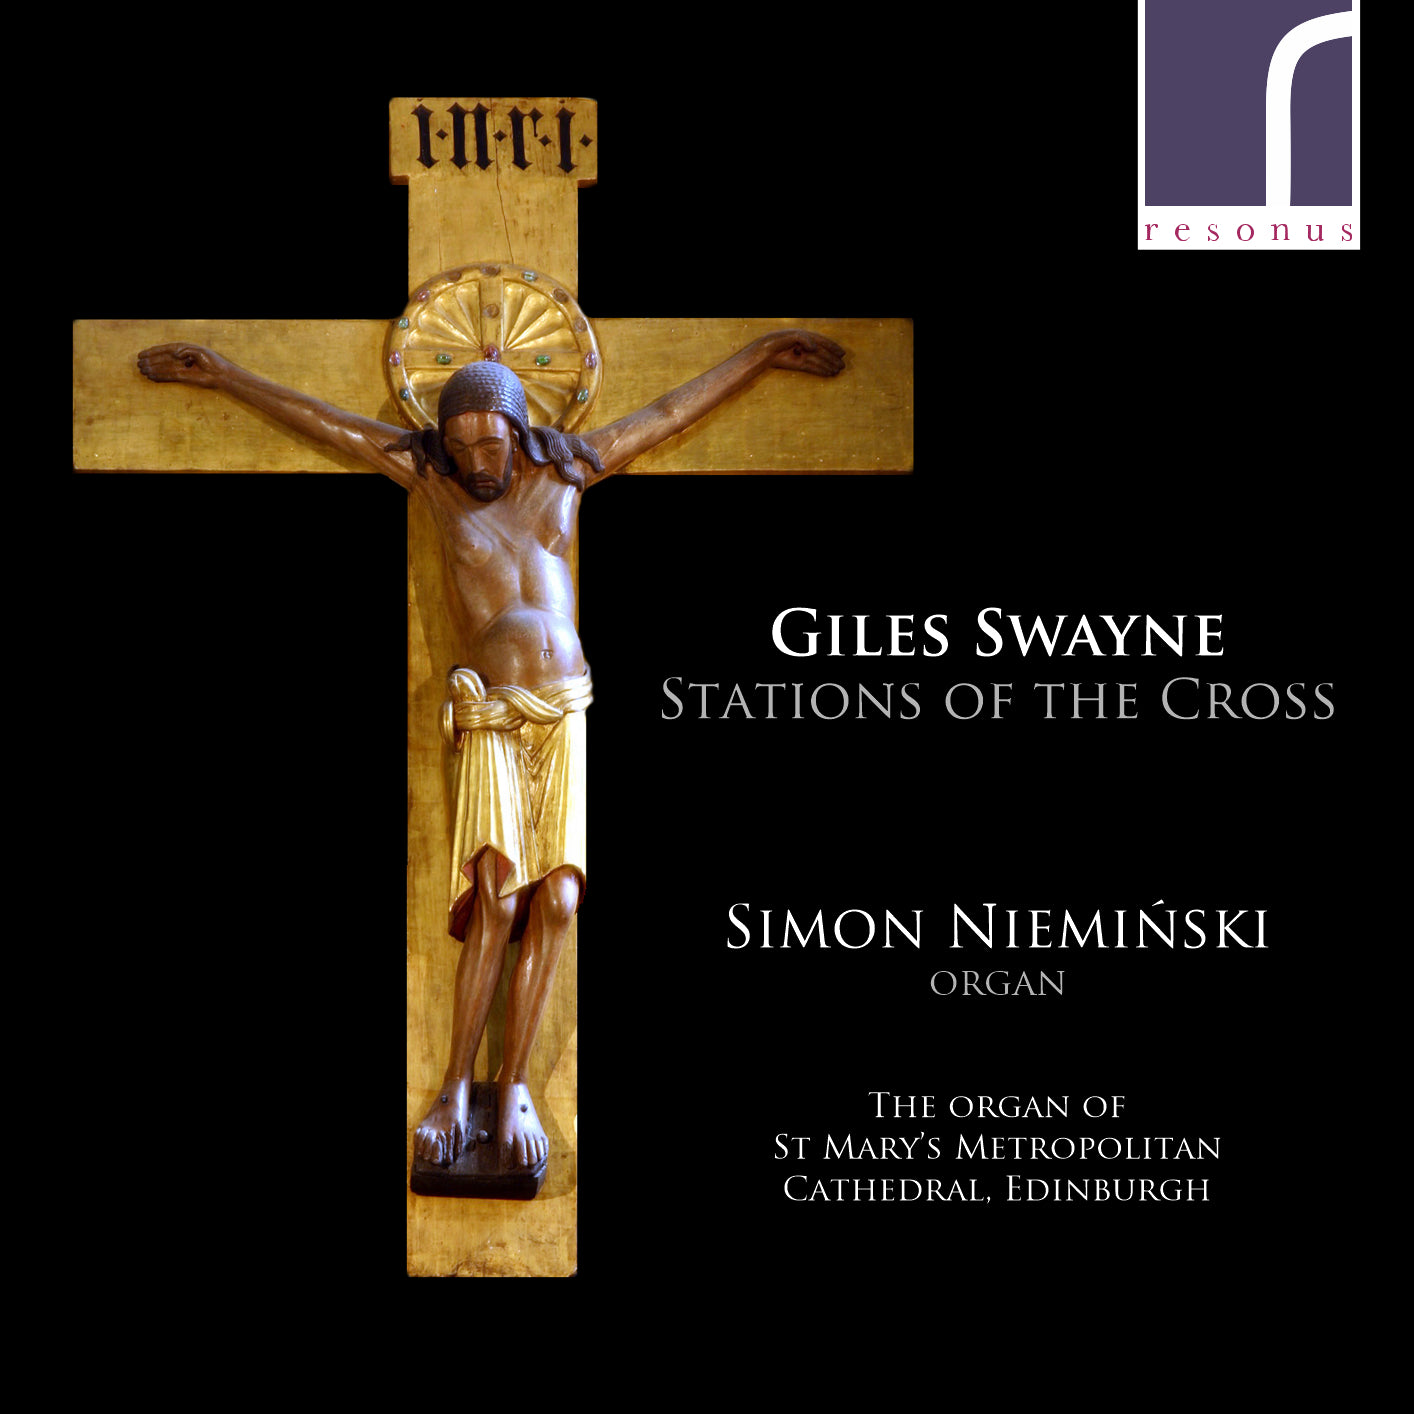 Giles Swayne: Stations of the Cross